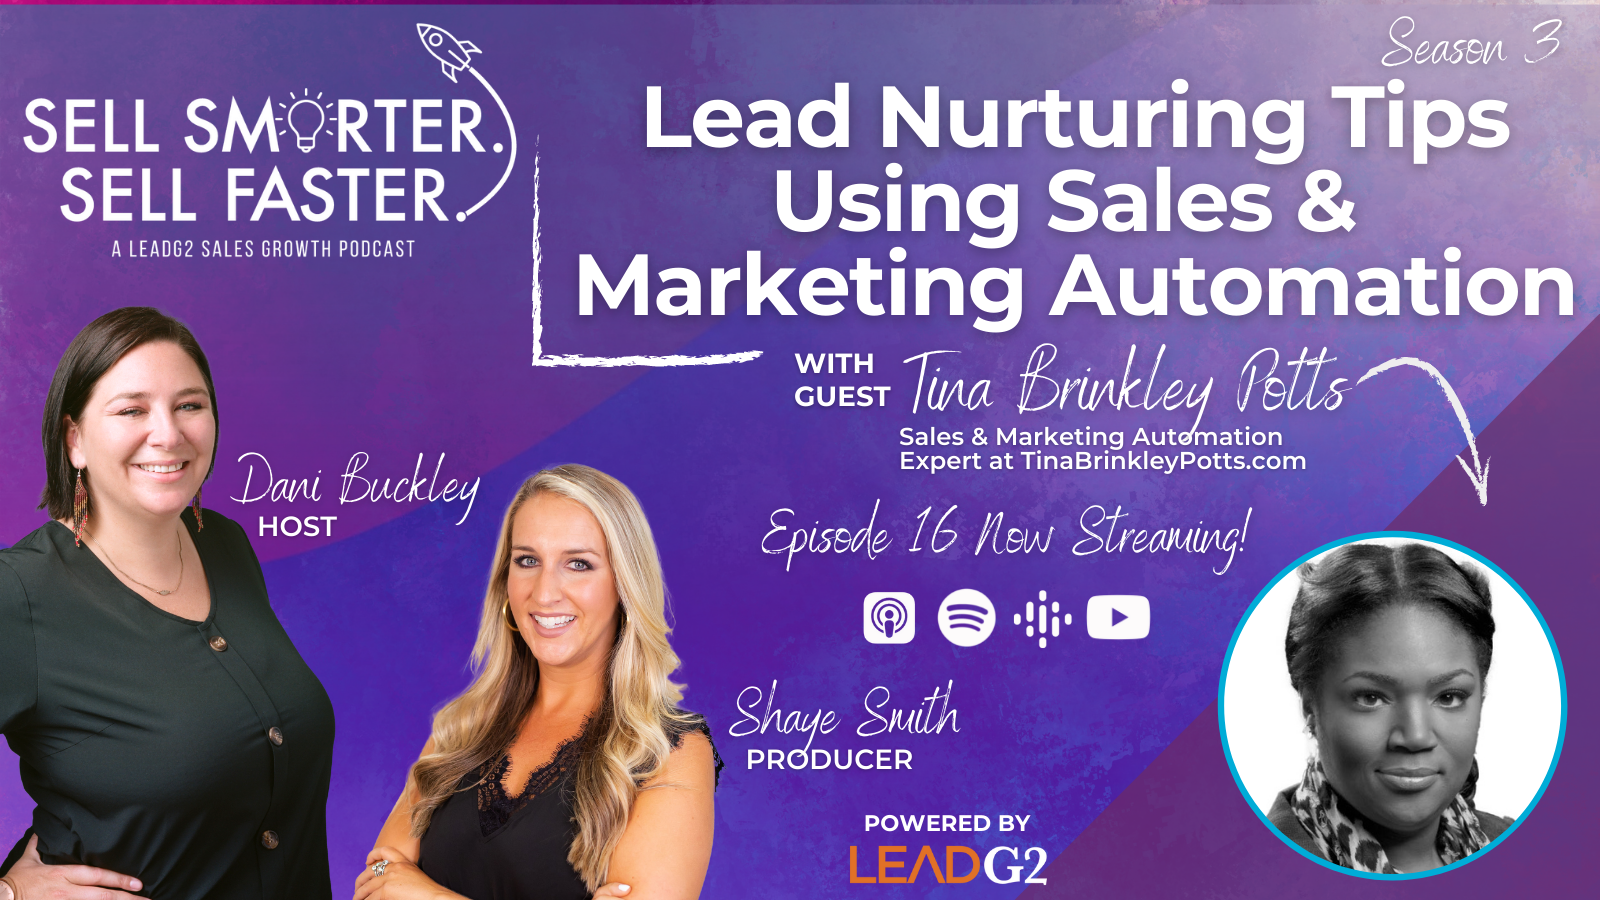 Lead Nurturing Tips Using Sales & Marketing Automation with Tina Brinkley Potts | Sell Smarter. Sell Faster. EP. 16